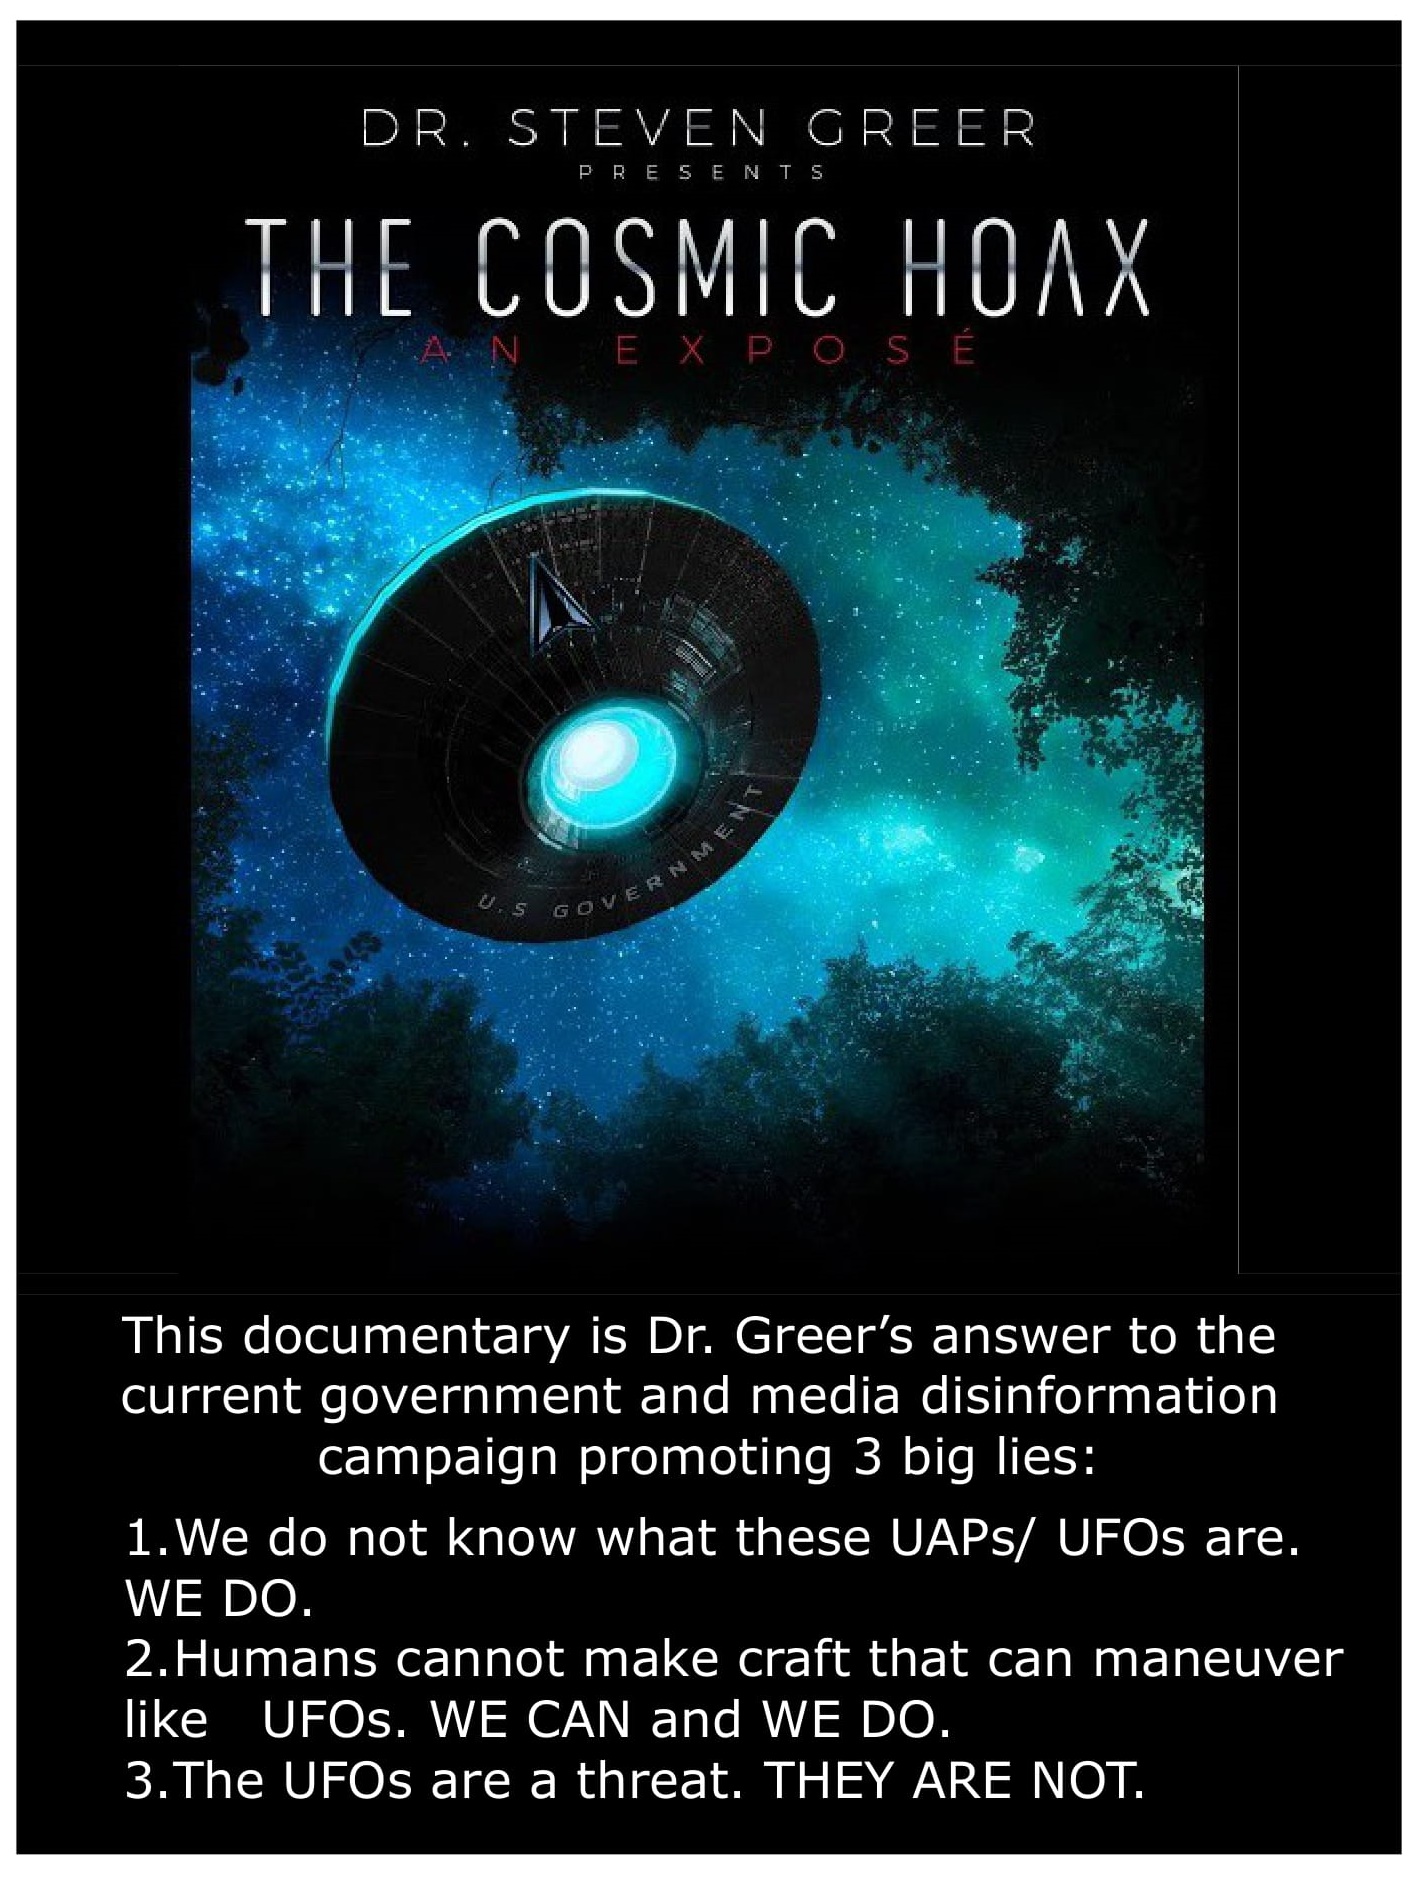 Watch - THE COSMIC HOAX